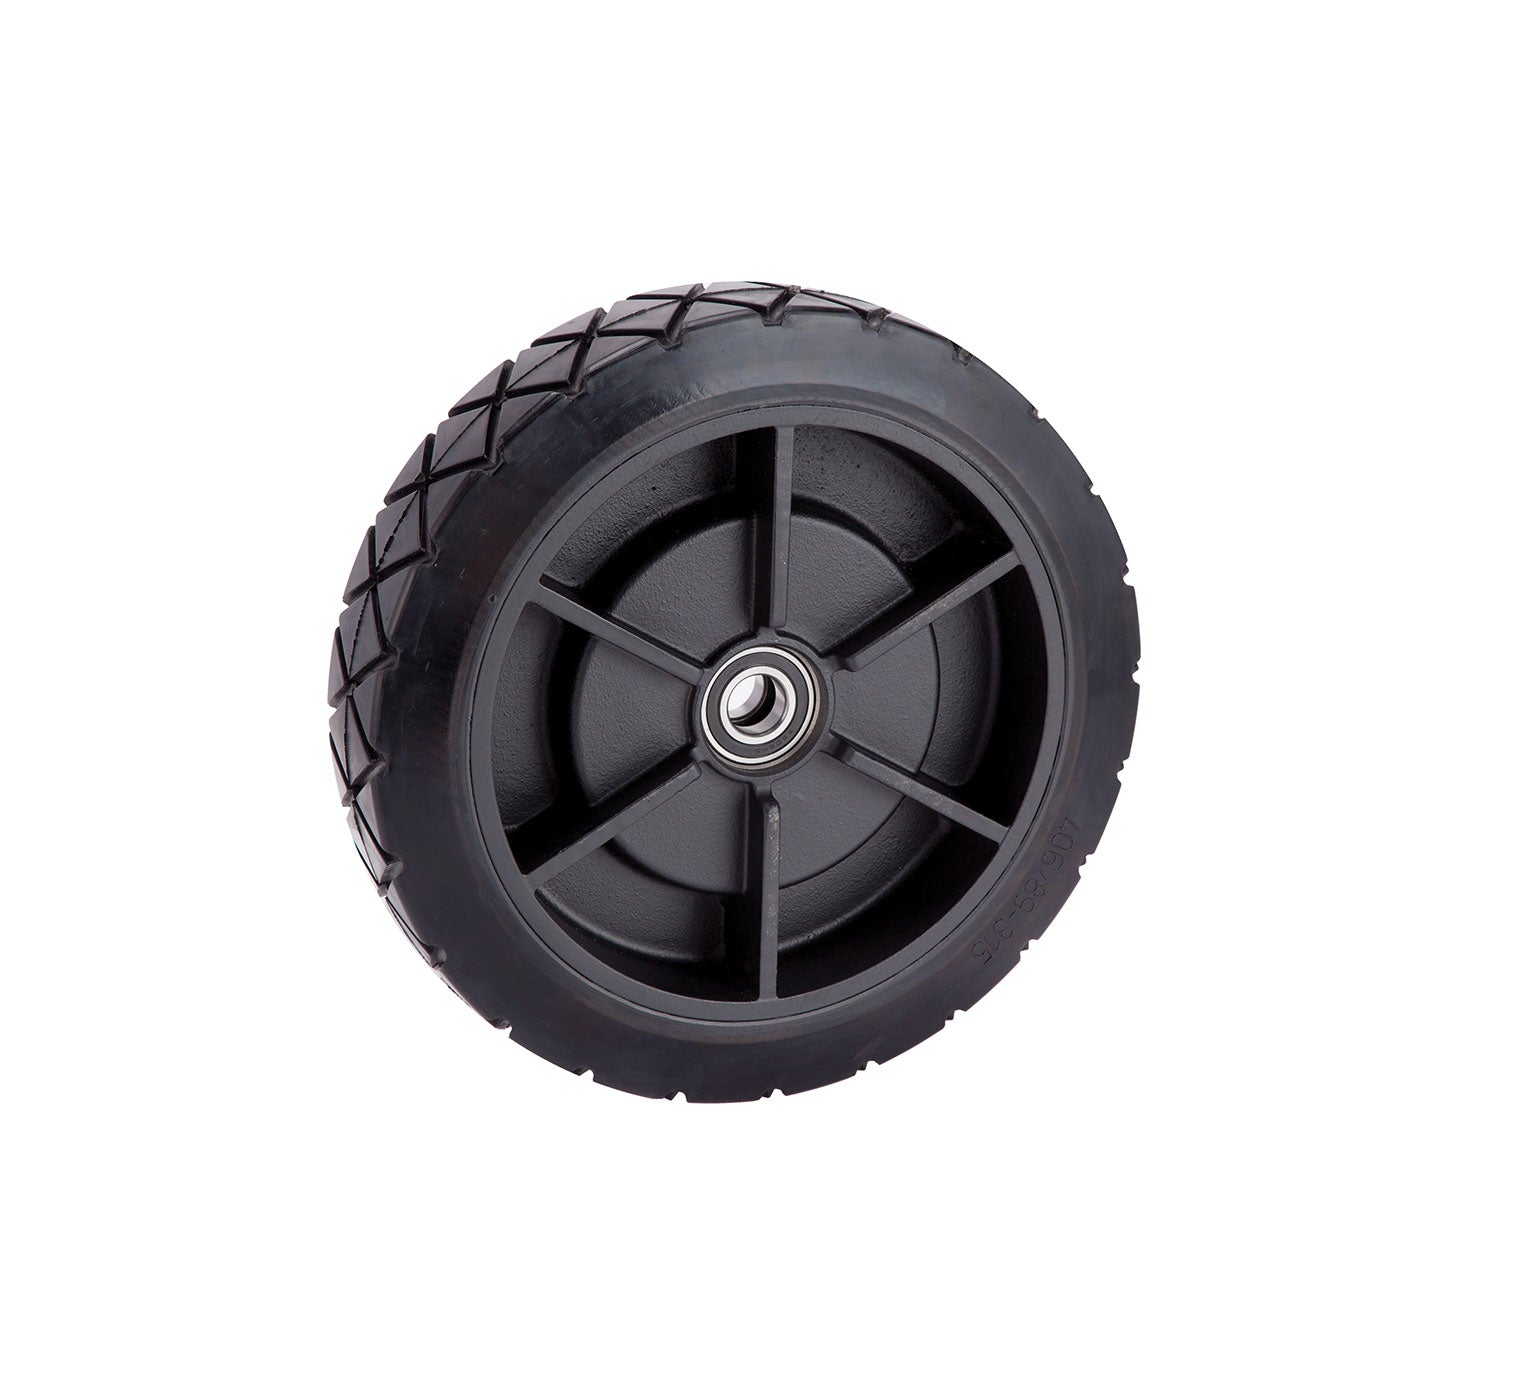 Solid black rear tire assembly 16.0" Length X 3.5" WidthB (sub for 1063238, replaces 360071, 363218, 1028590) 16 x 3.5 inch. Fits Tennant 8010, M20, S20, T20  Fits Tennant 1059671